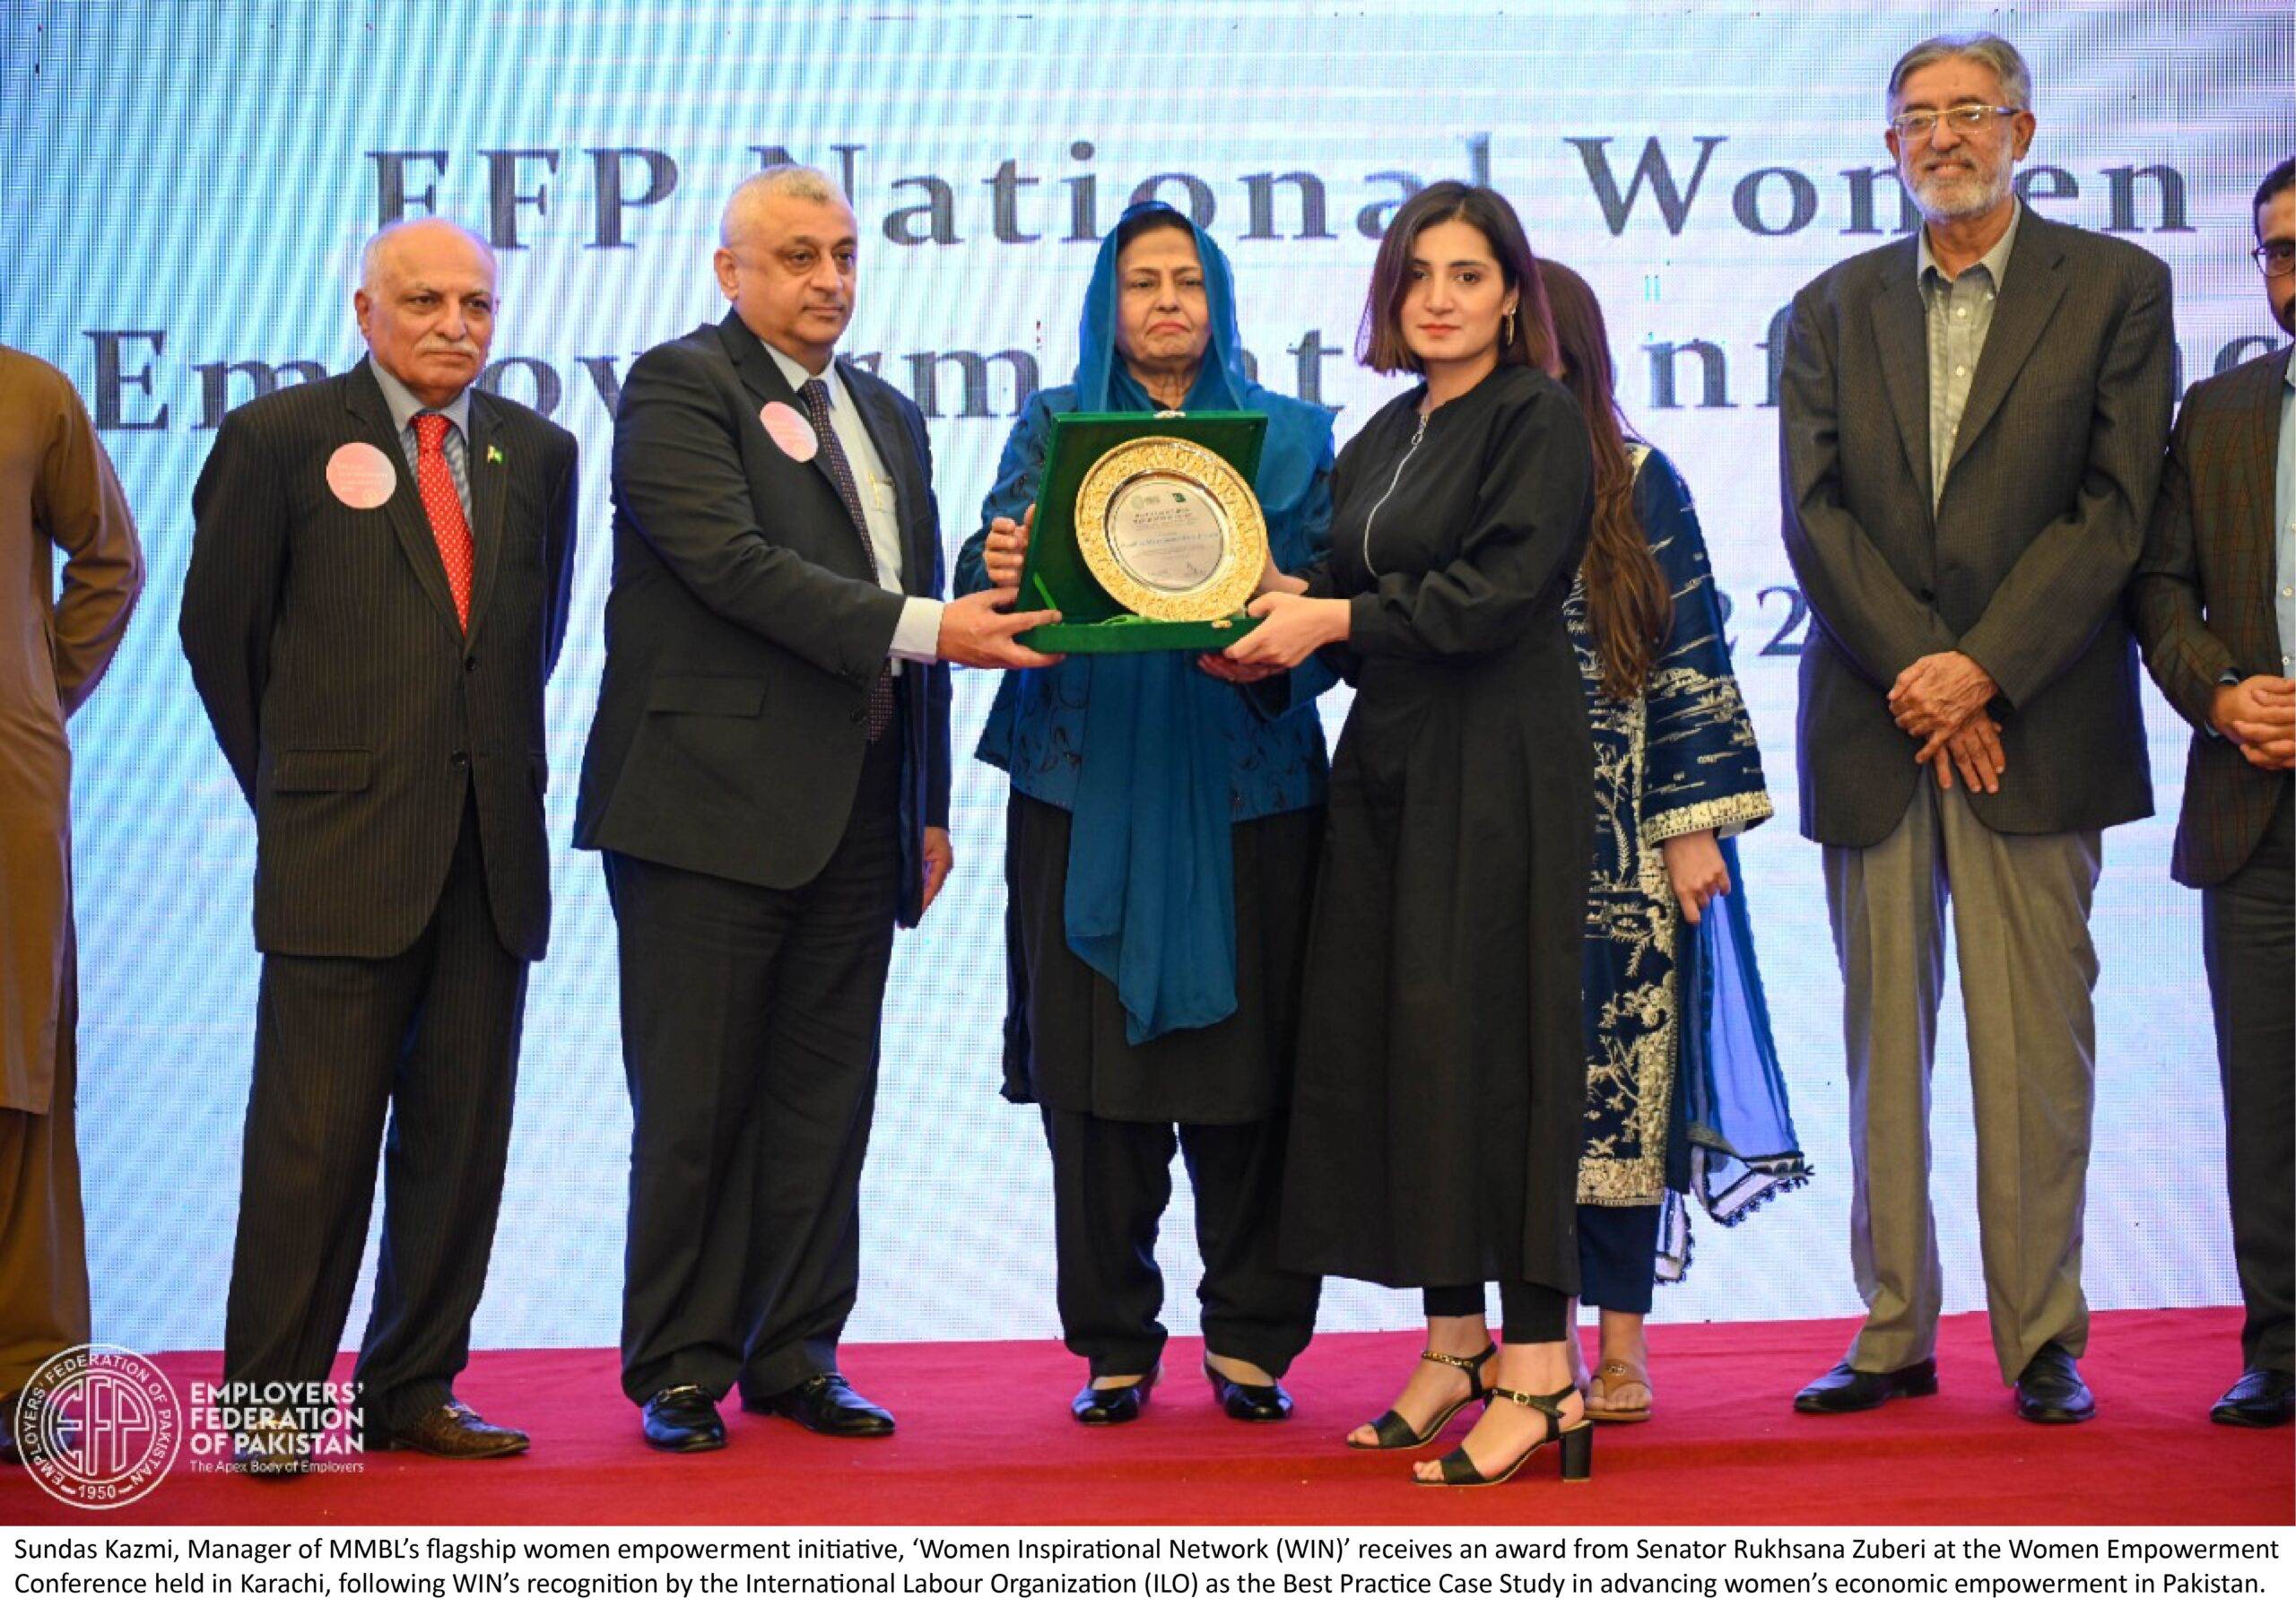 ILO recognizes MMBL’s WIN program as a Best Practice Case Study in Gender Equality and Women Empowerment